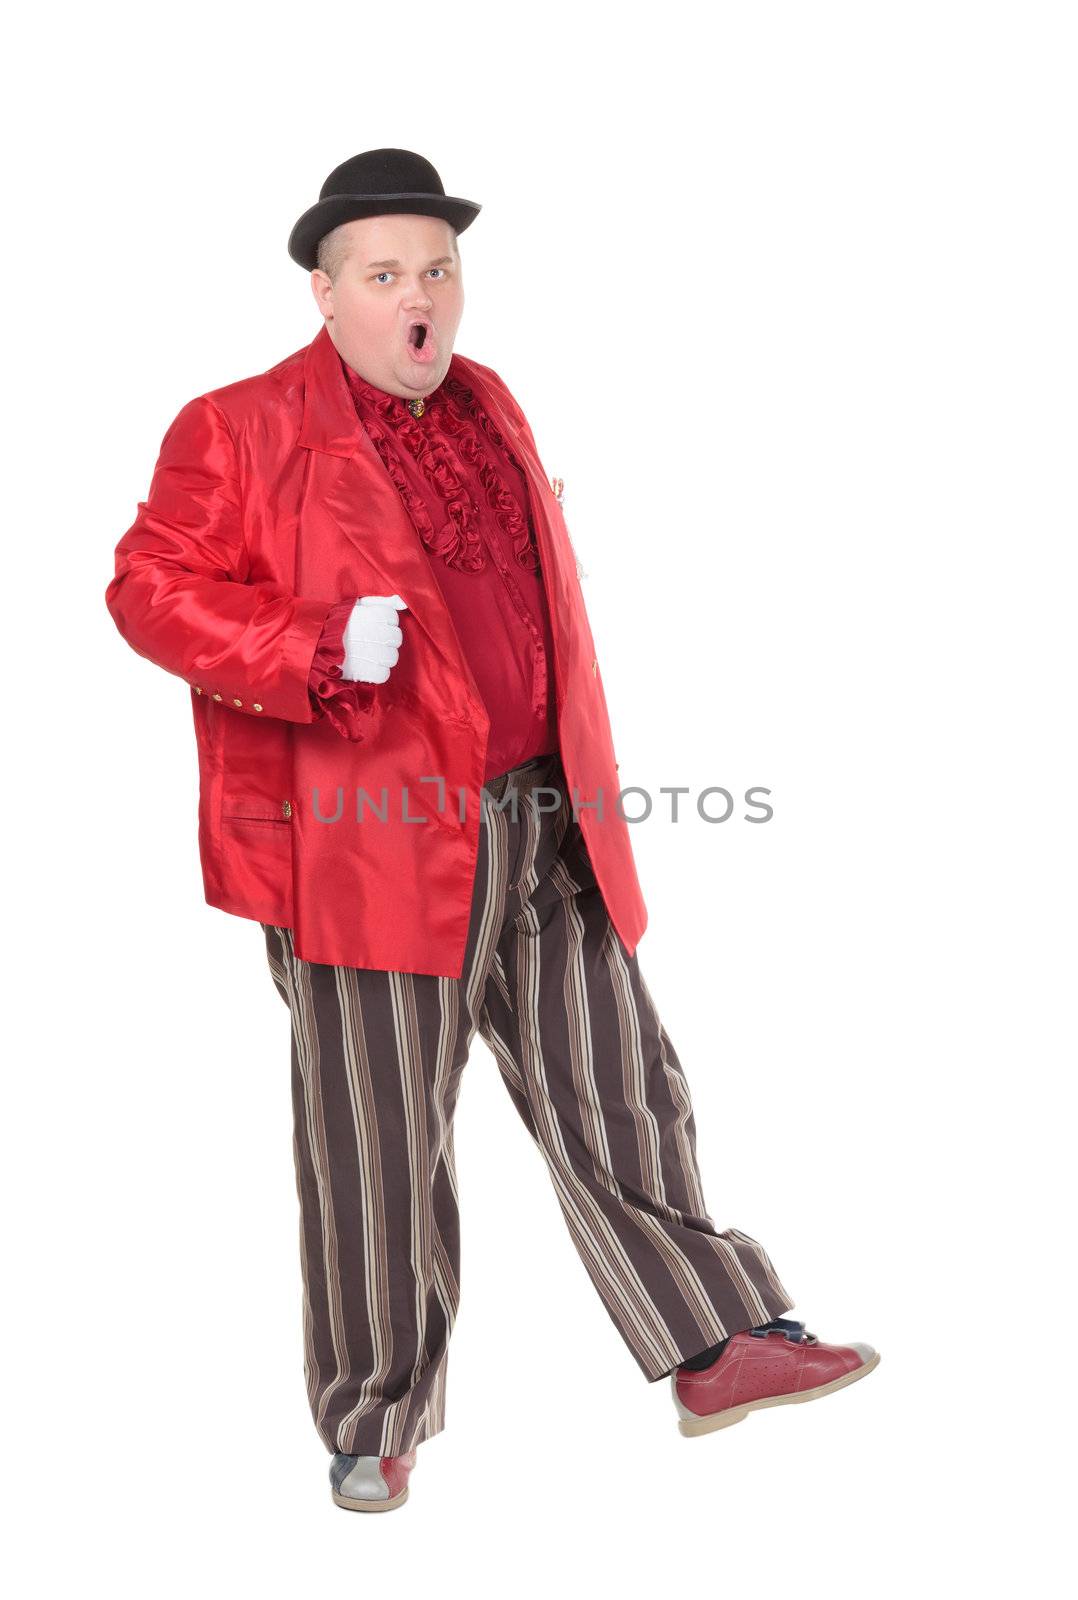 Obese man in a red costume and bowler hat by Discovod